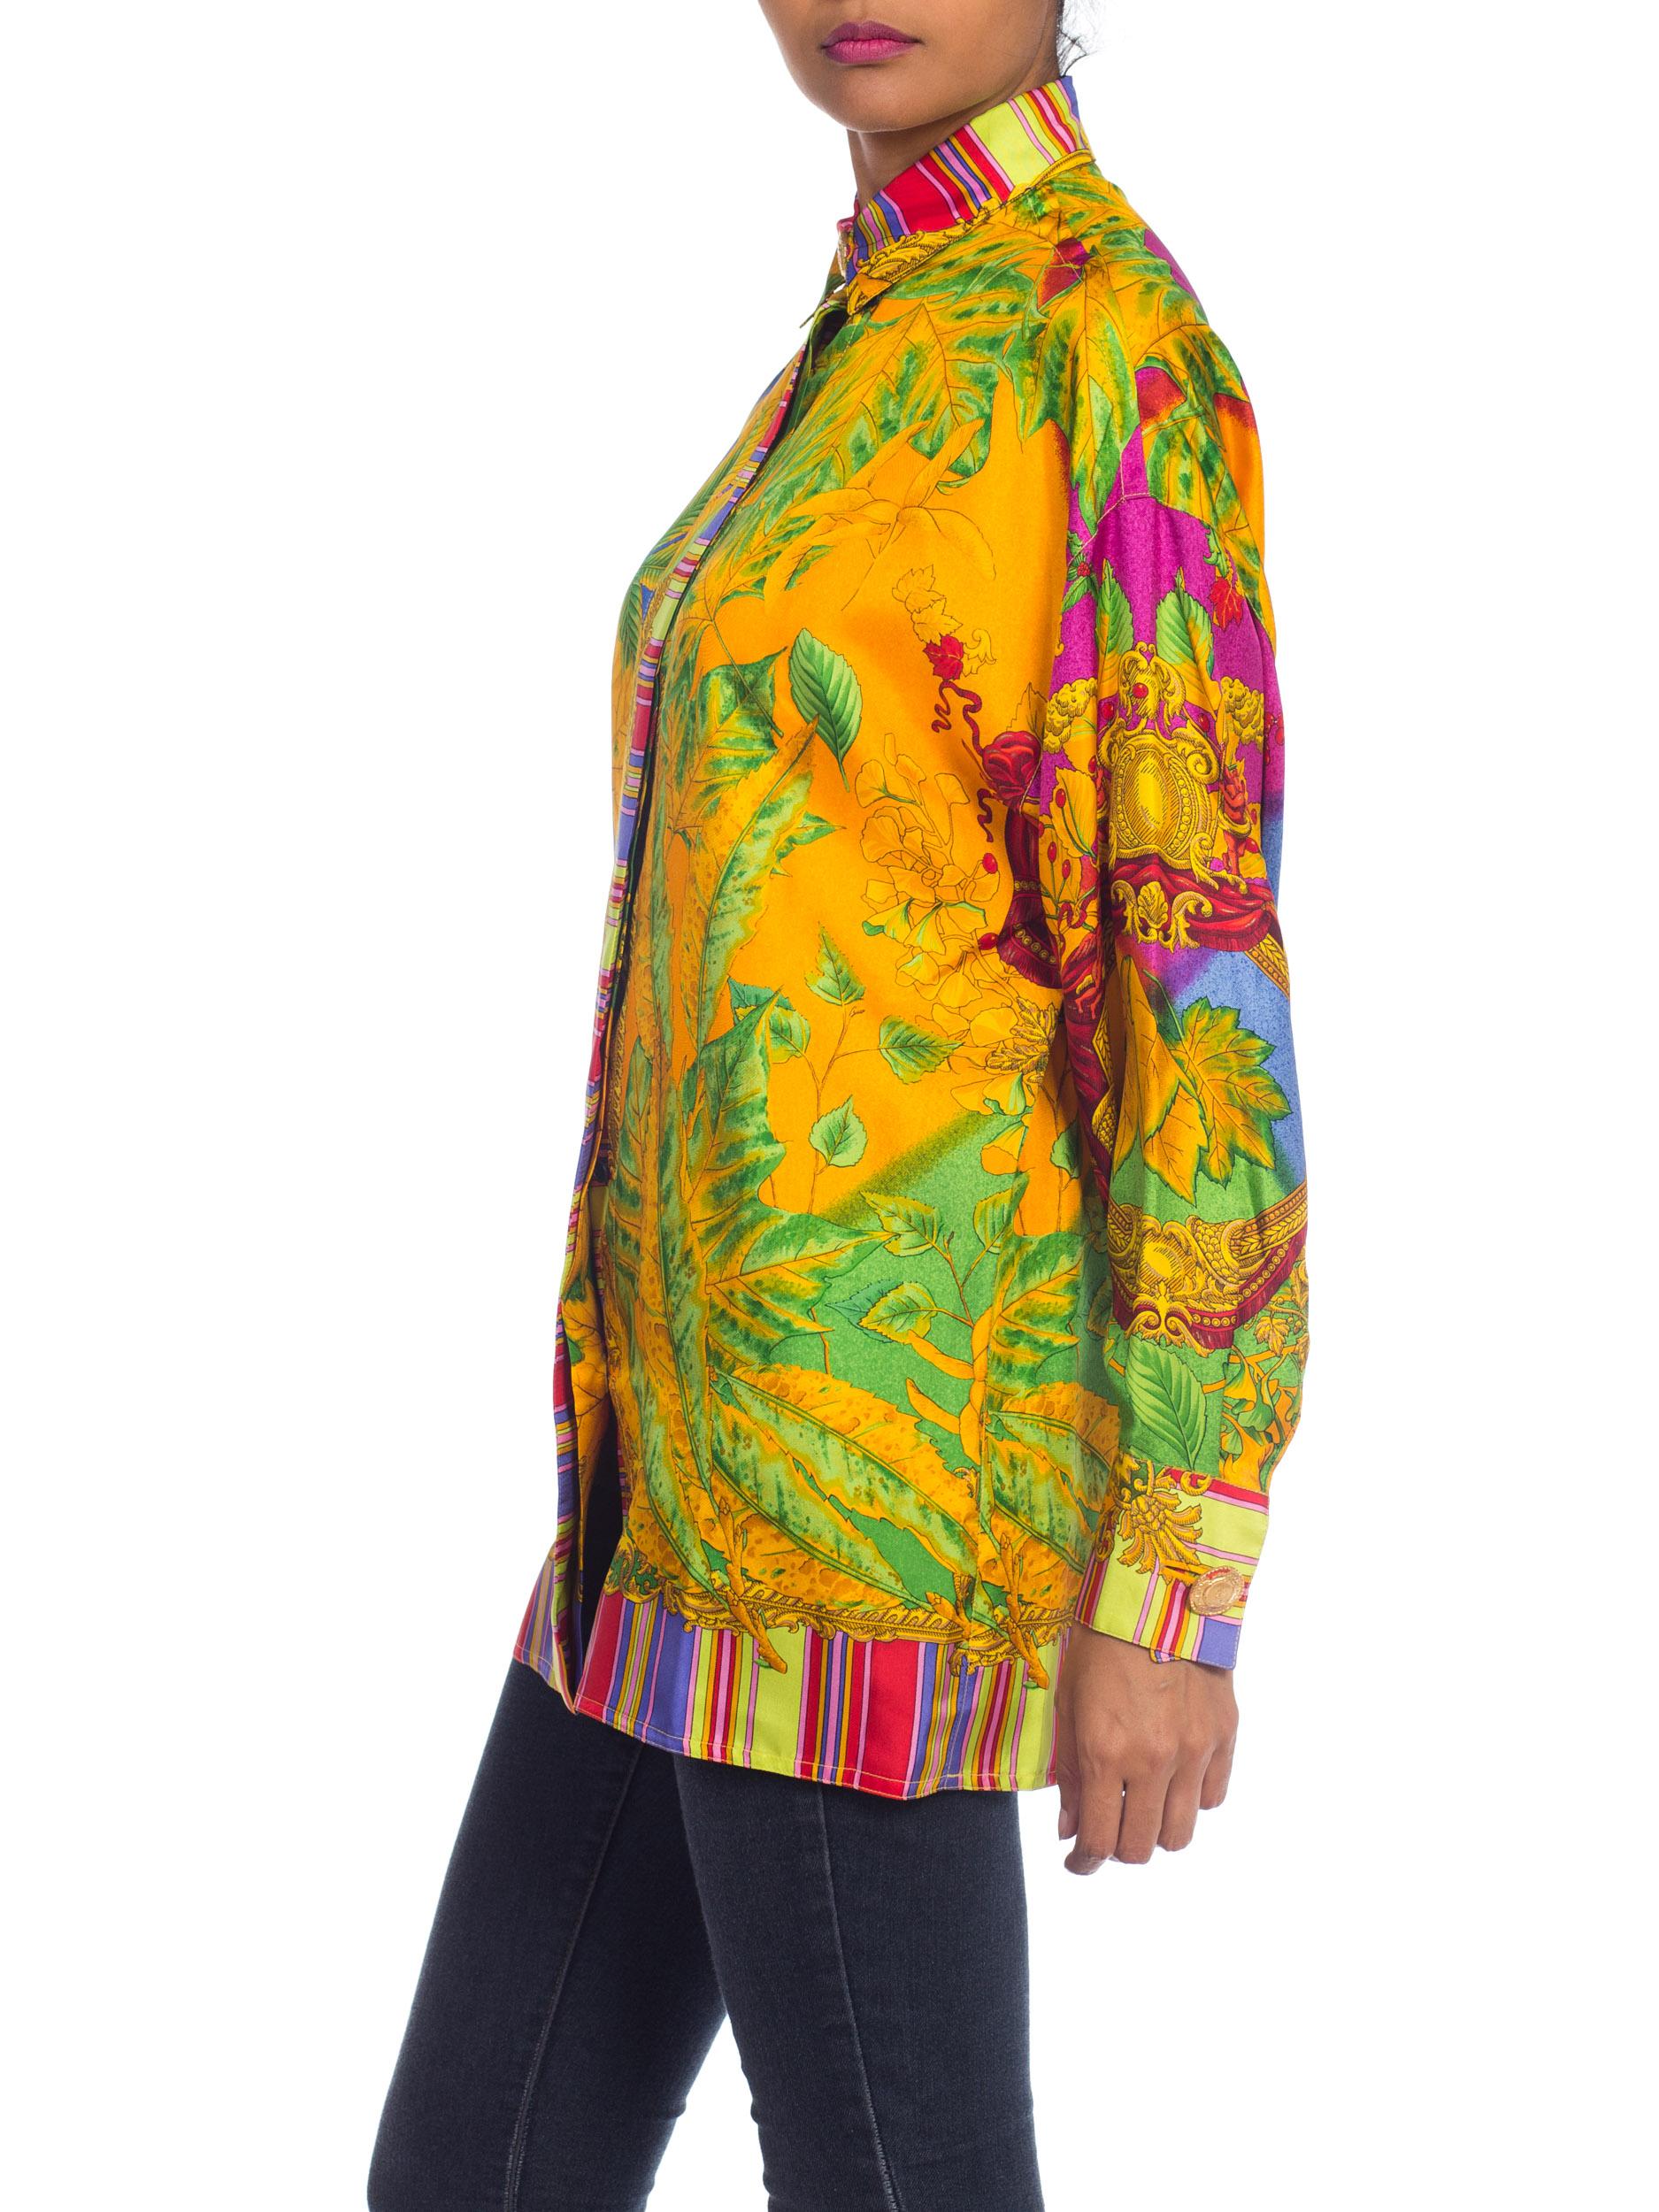 1990S ATELIER GIANNI VERSACE Printed Silk Baroque Leaves Shirt Sz 38 For Sale 4